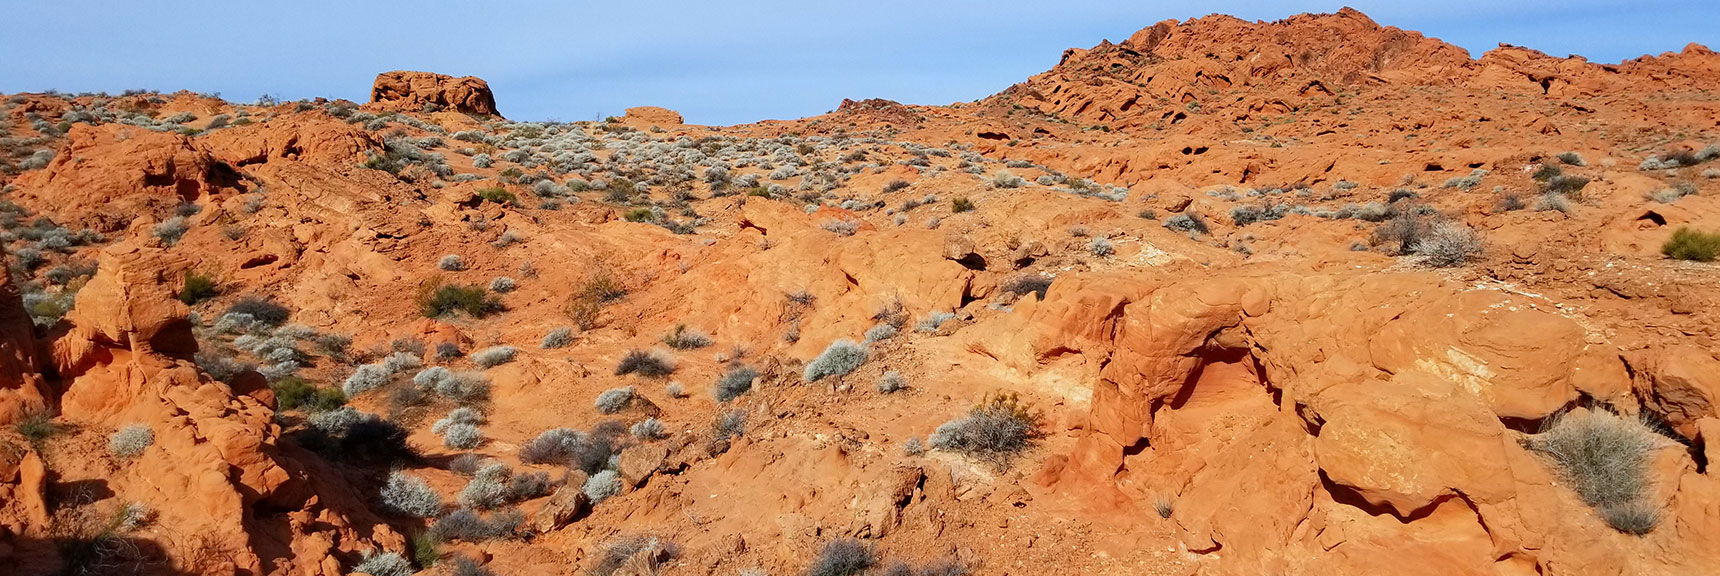 Navigating the Red Rock Hills South of Elephant Rock Loop in Valley of Fire State Park, Nevada